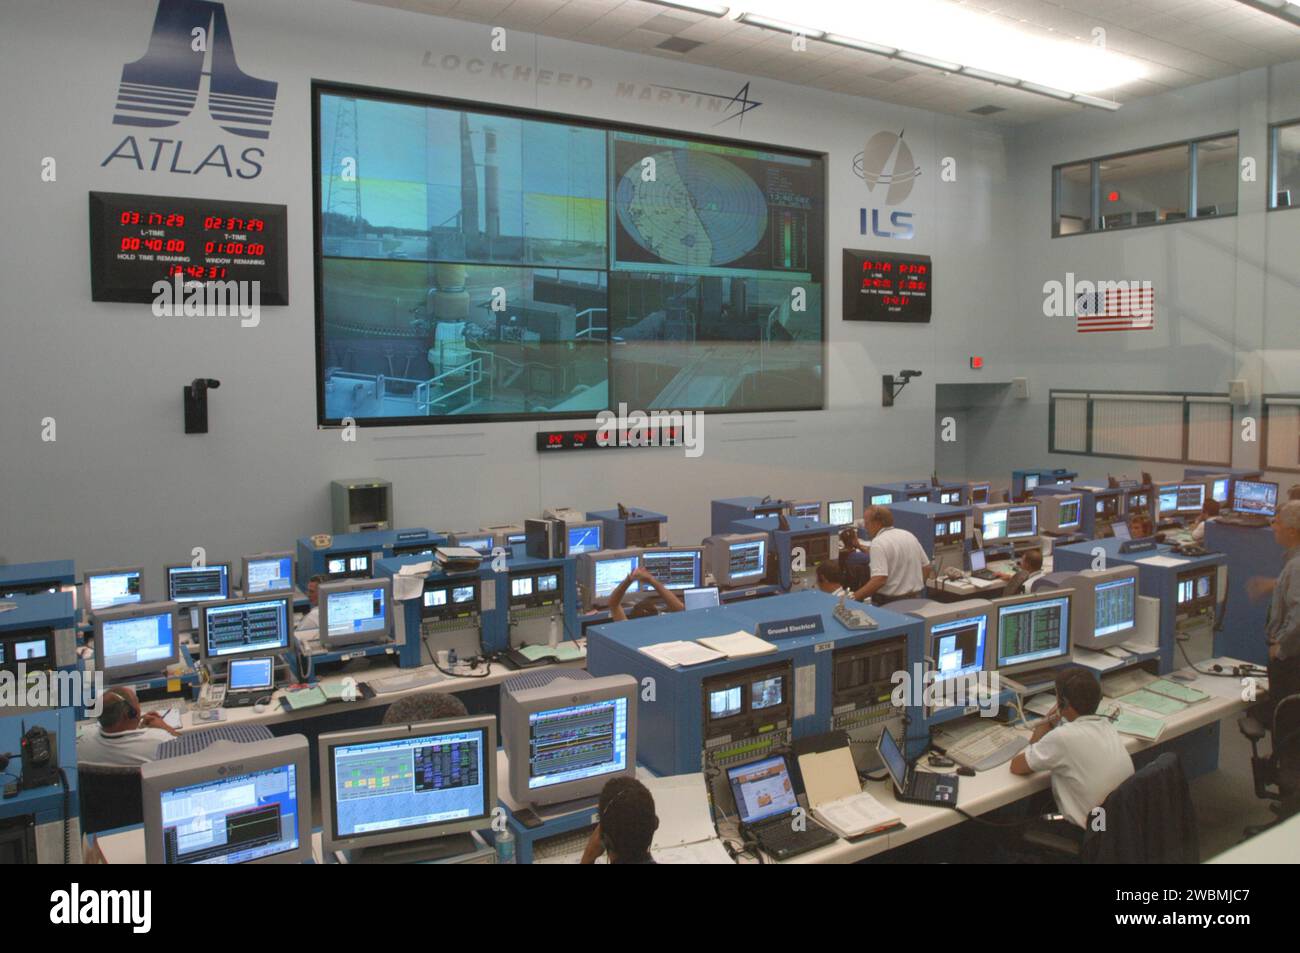 KENNEDY SPACE CENTER, FLA. - At the Atlas V Spaceflight Operations Center, the launch team goes through a wet dress rehearsal for launch of the Mars Reconnaissance Orbiter (MRO), scheduled for Aug. 10. Launch of the MRO aboard an Atlas V rocket will be from Launch Complex 41 at Cape Canaveral Air Force Station in Florida. A wet rehearsal includes pre-liftoff operations and fueling the rocket’s engine. The MRO was built by Lockheed Martin for NASA Jet Propulsion Laboratory in California. It is the next major step in Mars exploration and scheduled for launch from Cape Canaveral Air Force Station Stock Photo